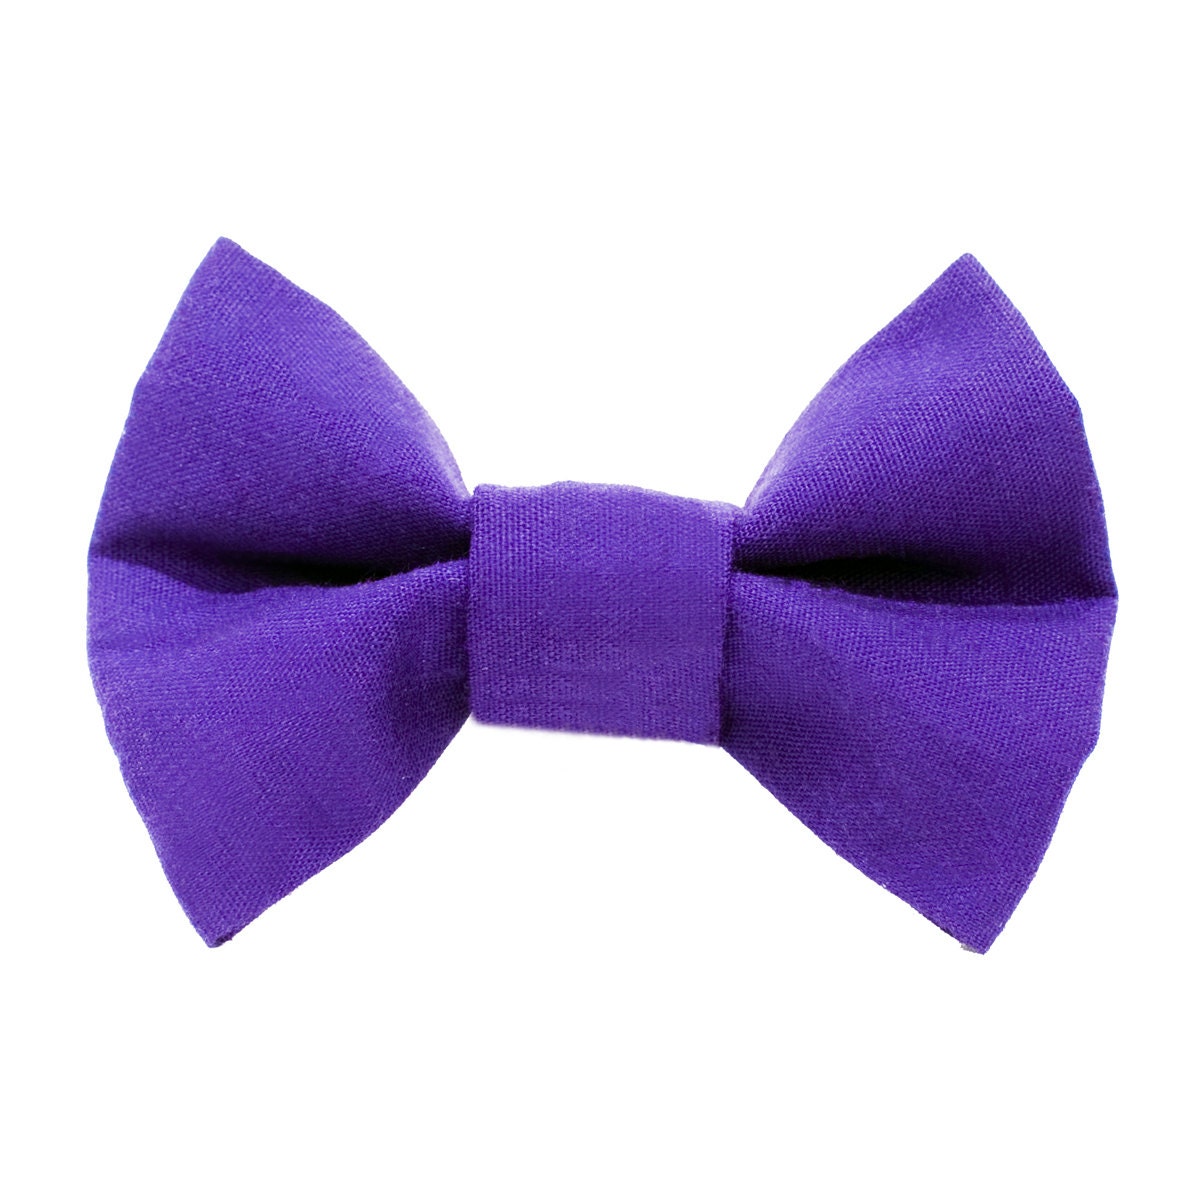 The Manager on Duty - Purple Cat Bow Tie